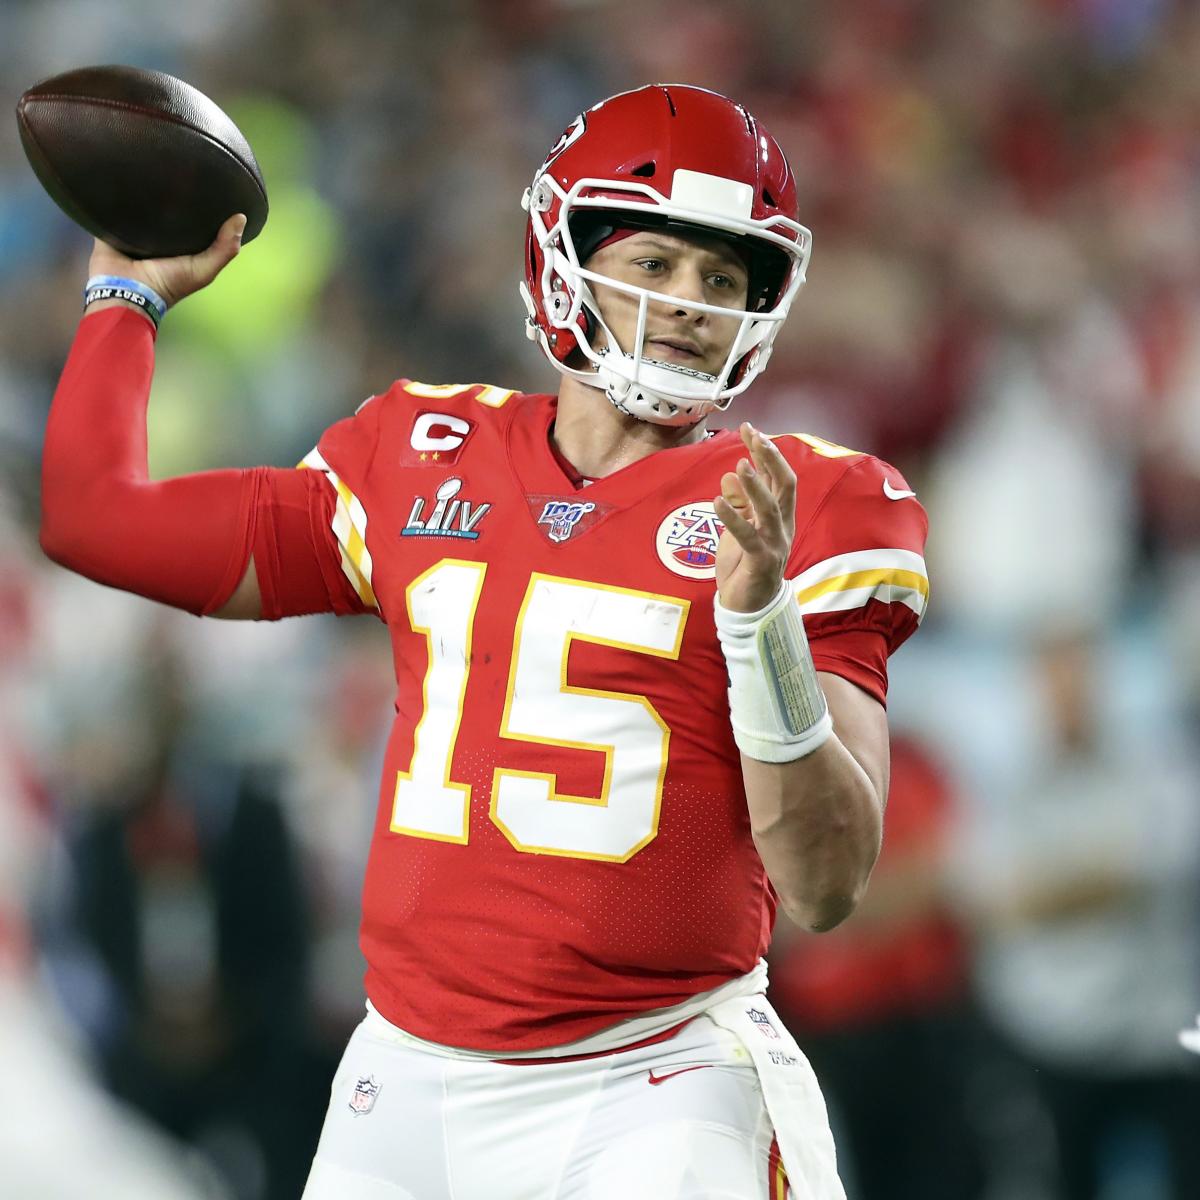 Patrick Mahomes Signed NFL Defend Patch Rookie Card Sells for $43,000 at Auction